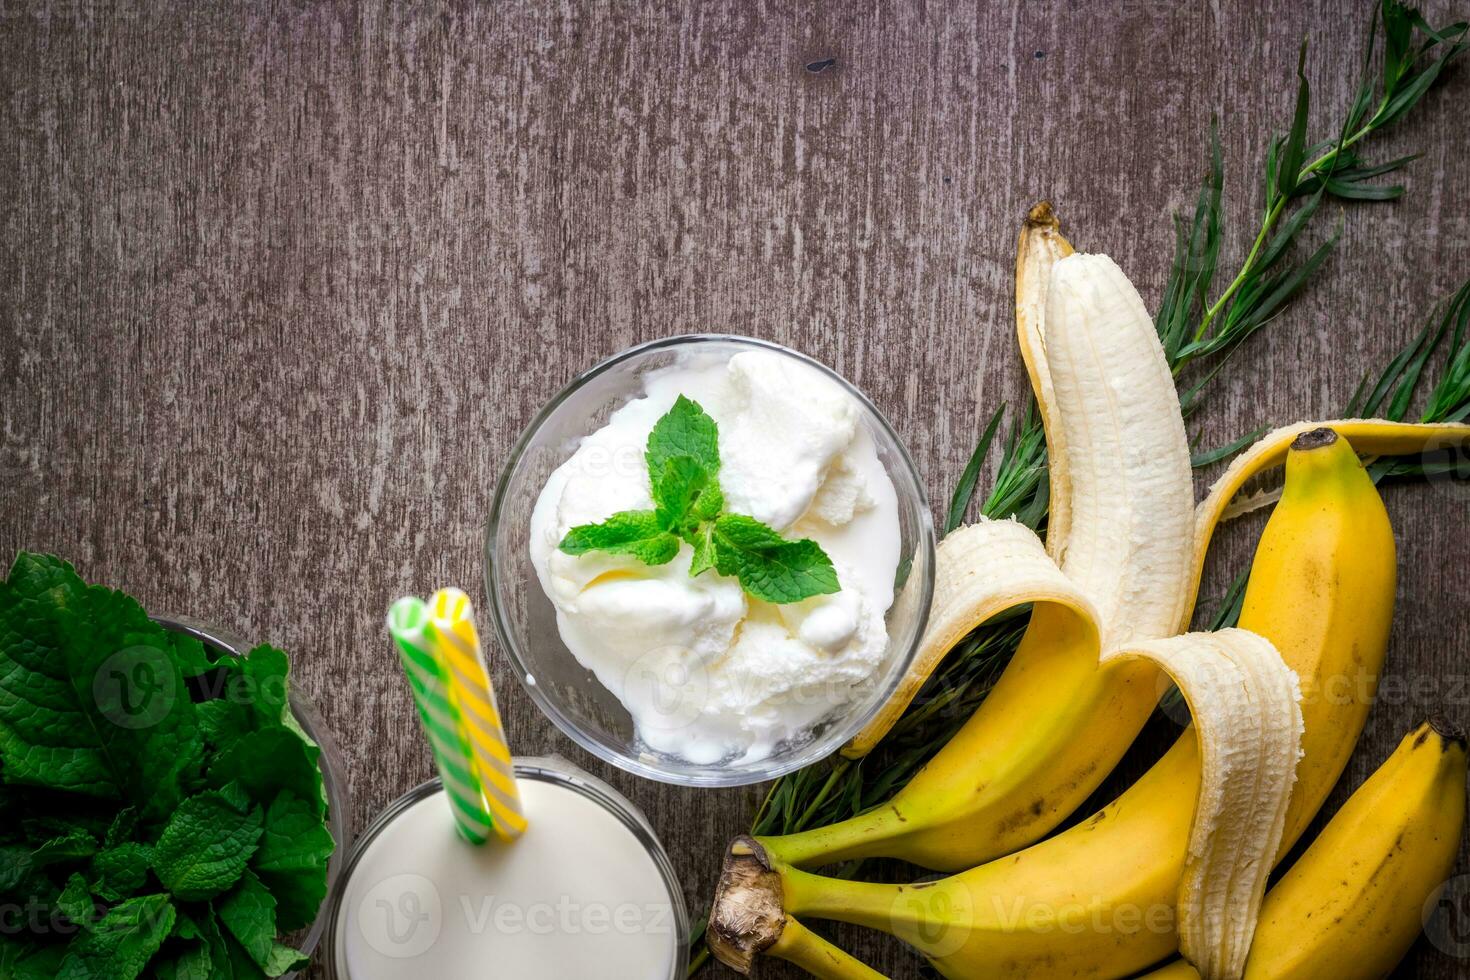 Ice cream with fresh banana and mint on wooden table. photo